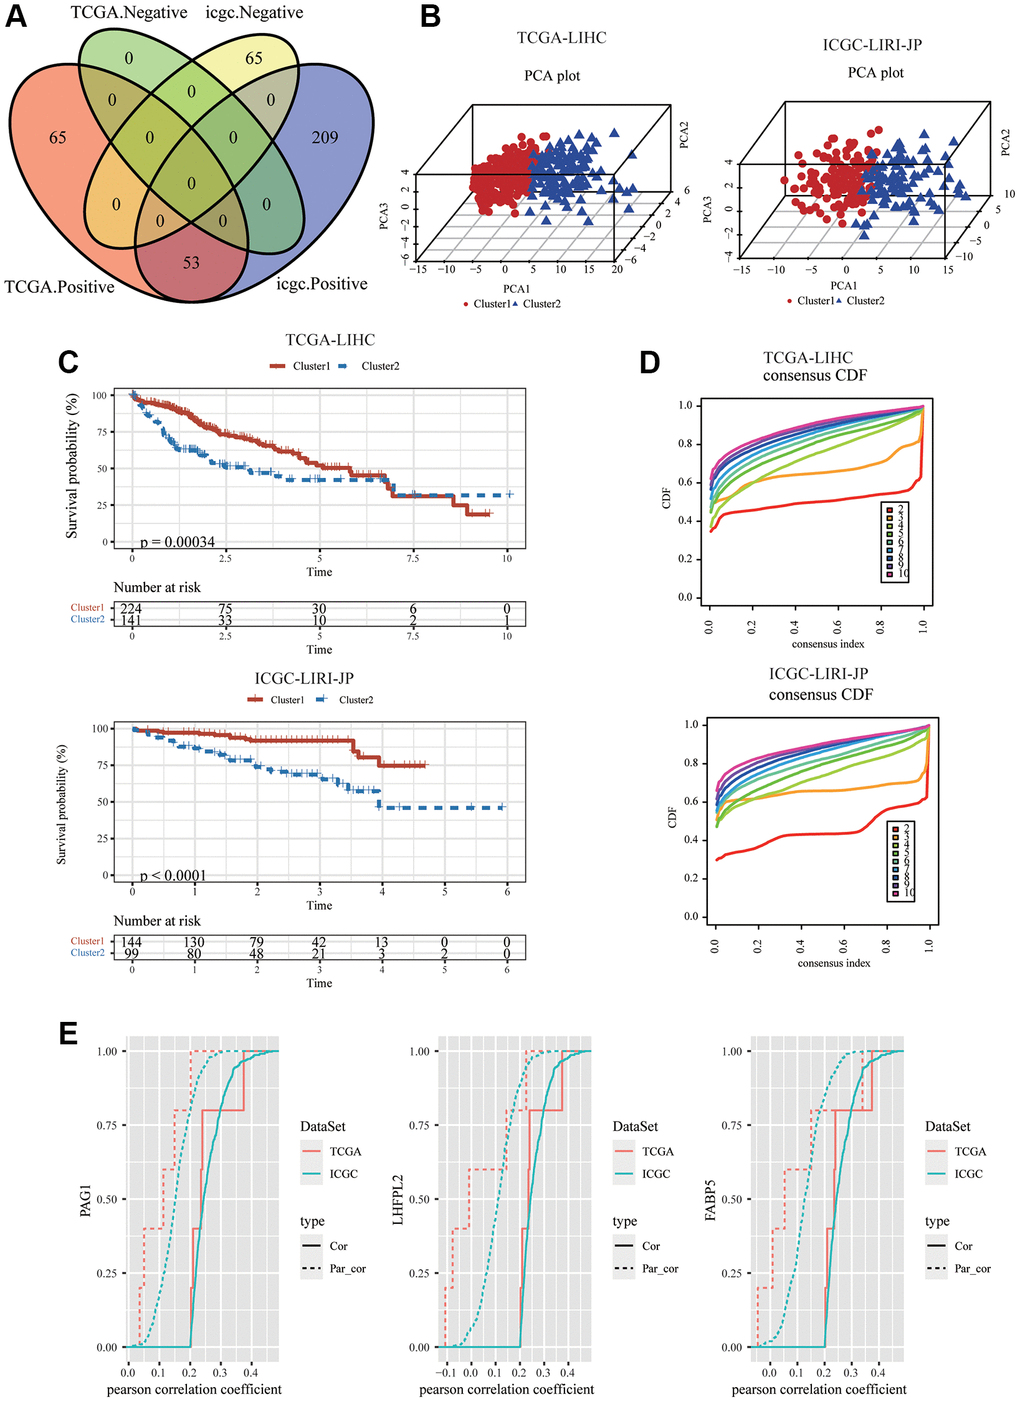 Identification of the three HCC-specific mTORC1 signaling-related genes. (A) Venn diagram showed that 53 mTORC1-related genes were positively correlated with mTORC1 scores in TCGC-LIHC and ICGC-LIRI-JP cohorts. (B) The 3D plots of PCA of TCGC-LIHC and ICGC-LIRI-JP dataset according to 53 genes’ expression levels in different risk groups. (C) The prognosis was significantly different between the two clusters in TCGC-LIHC and ICGC-LIRI-JP cohorts. (D) The relative alterations in the area under the CDF curves, and tracking plots exhibited the index from 2 to 9 in TCGC-LIHC and ICGC-LIRI-JP cohorts. (E) PAG1, LHFPL2, and FABP5 were identified as critical mTORC1-related genes, regardless of whether the first-order partial correlation is modified.